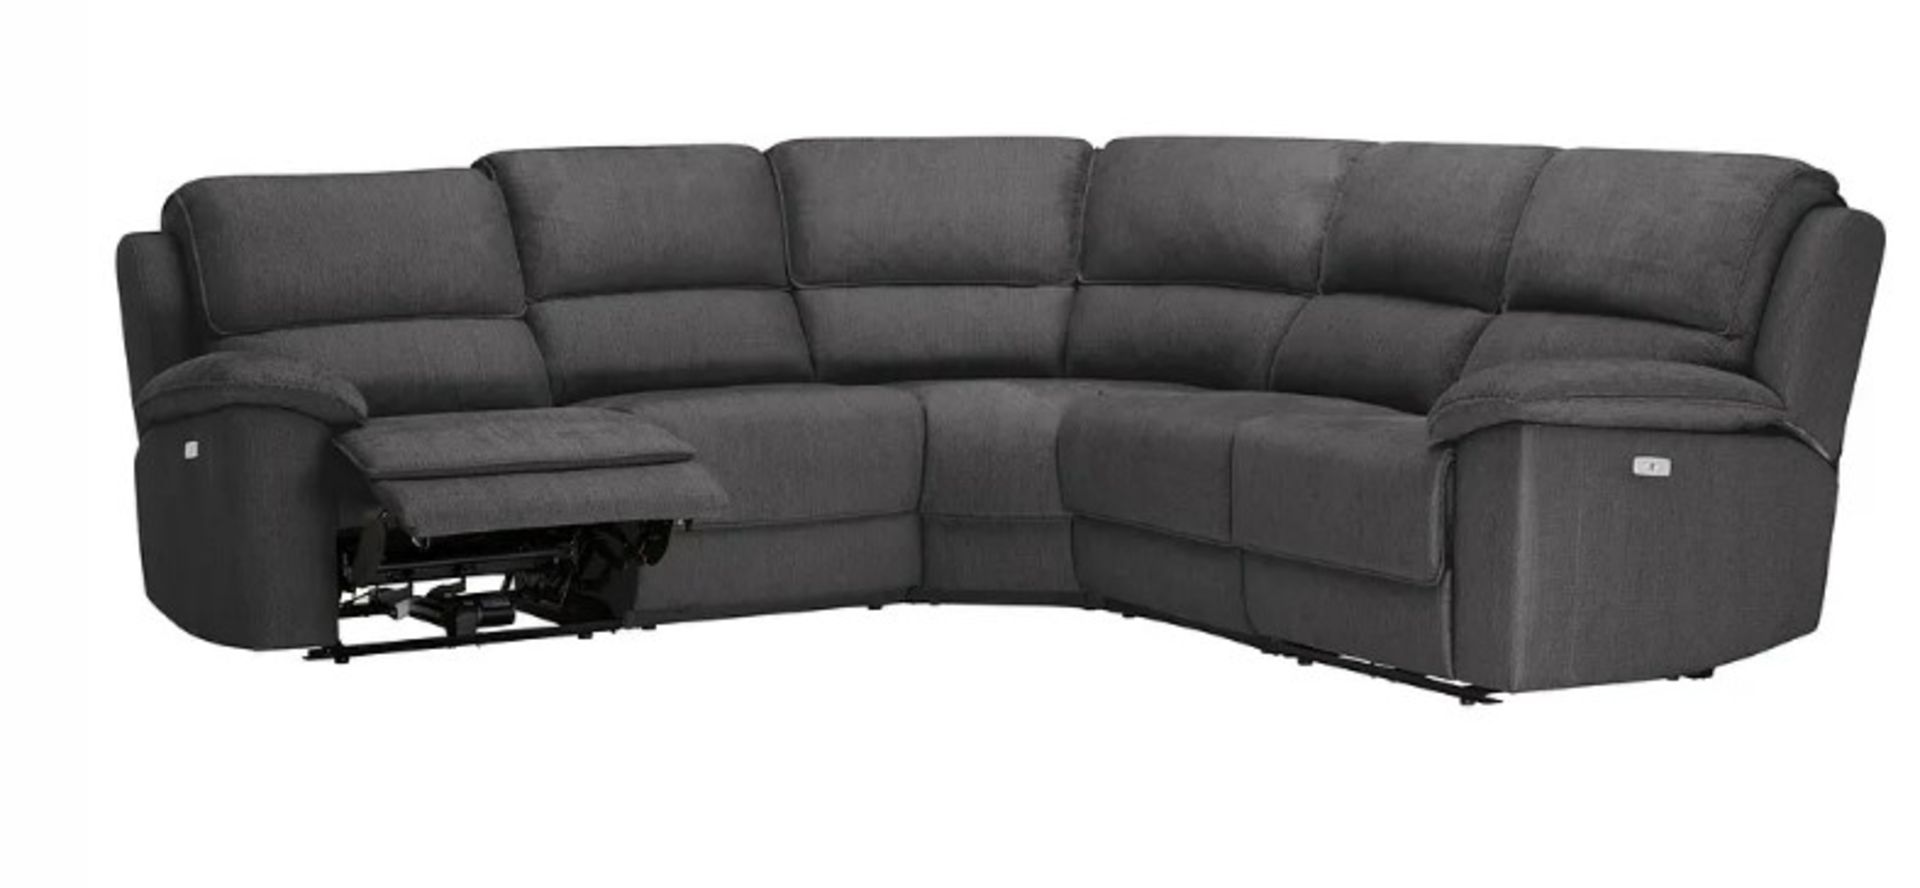 GOODWOOD 6 Seat Corner Recliner Sofa | Plush Charcoal Fabric. RRP £2,549. (ROW7-6BOXES) The Goodwood - Image 2 of 9